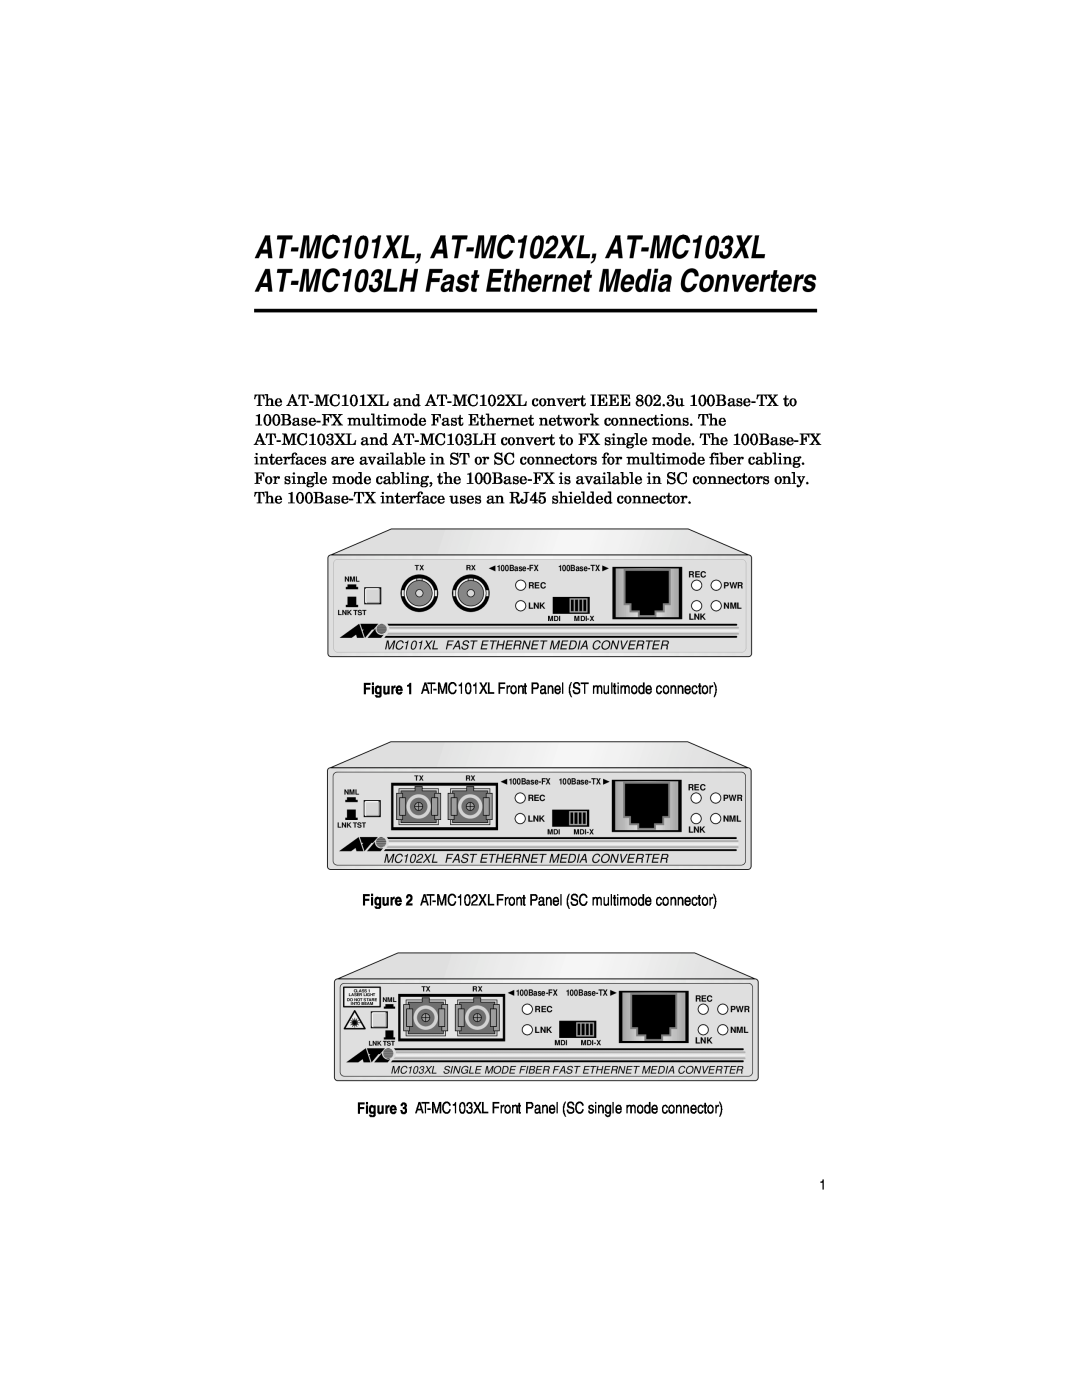 Allied Telesis AT-MC103LH AT-MC101XL Front Panel ST multimode connector, AT-MC102XL Front Panel SC multimode connector 